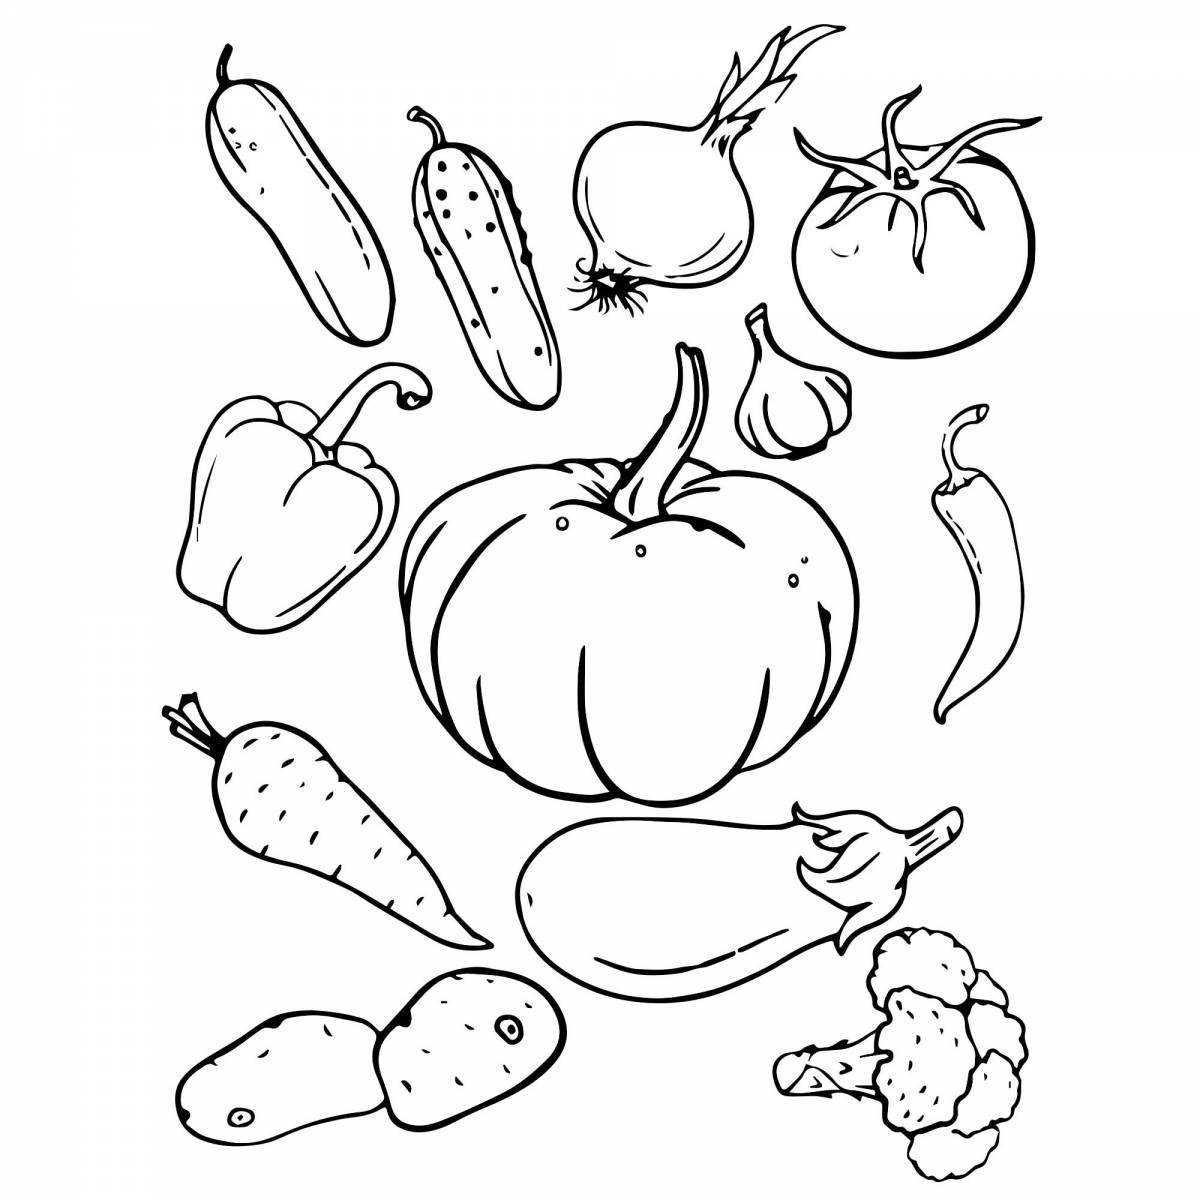 Adorable vegetables and fruits coloring book